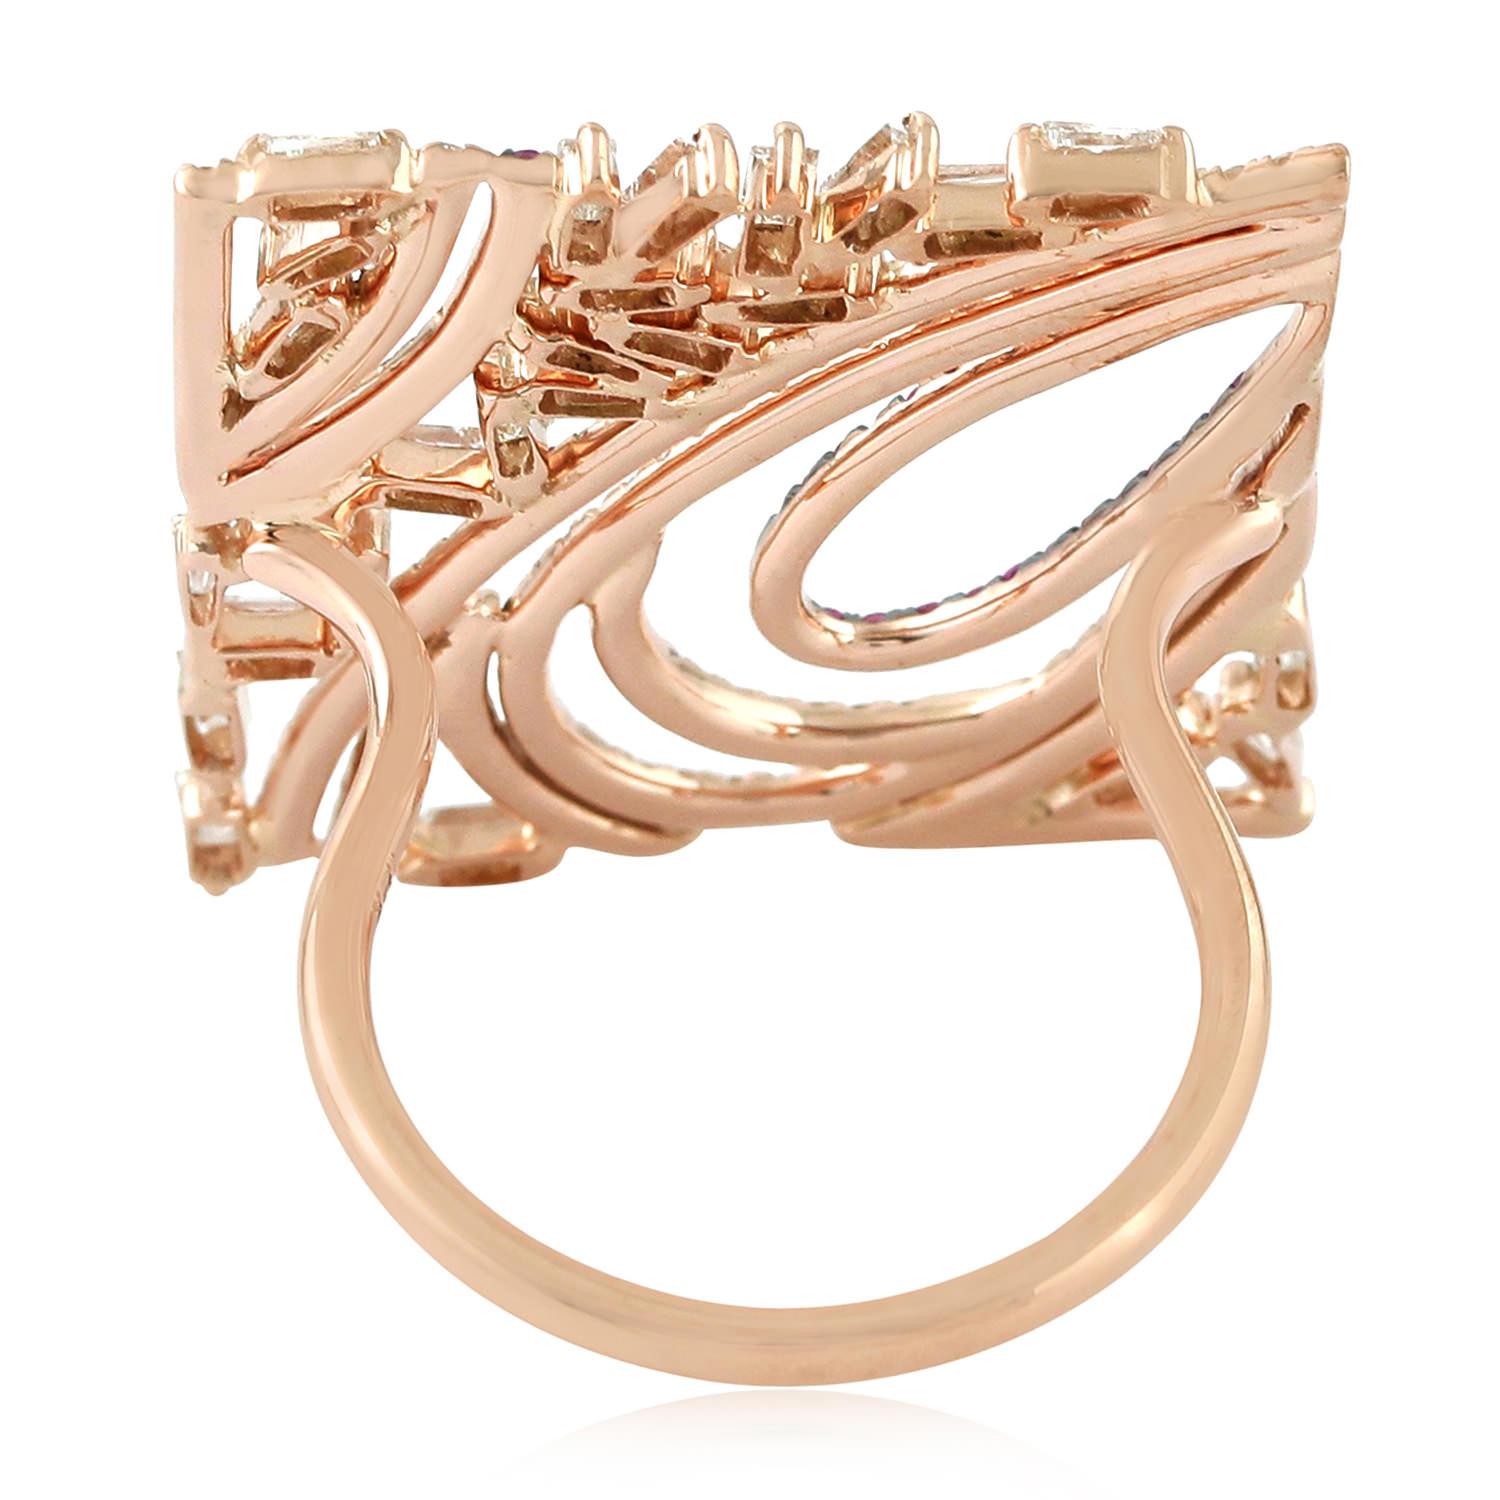 Art Deco Square Shaped Ring With Pink Sapphire & Diamonds Made In 18k Rose Gold For Sale